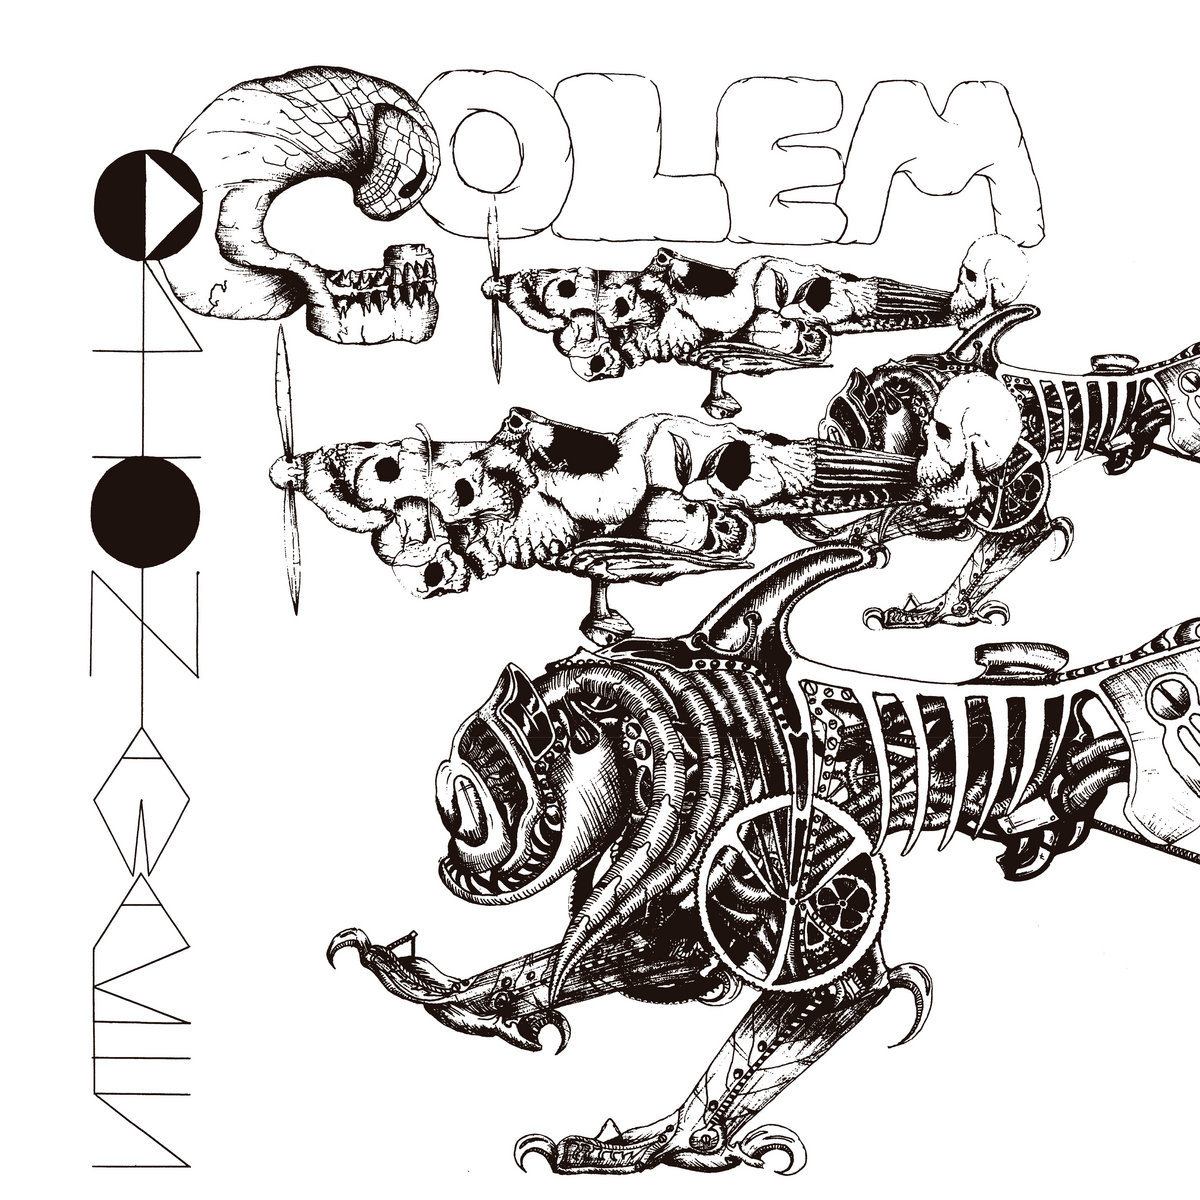 The Psi-Fi label in the UK then released full albums from six of the bands anthologized on the Unknown Deutschland series in 1996 and 97. Golem’s Orion Wakes is easily the best of the lot.